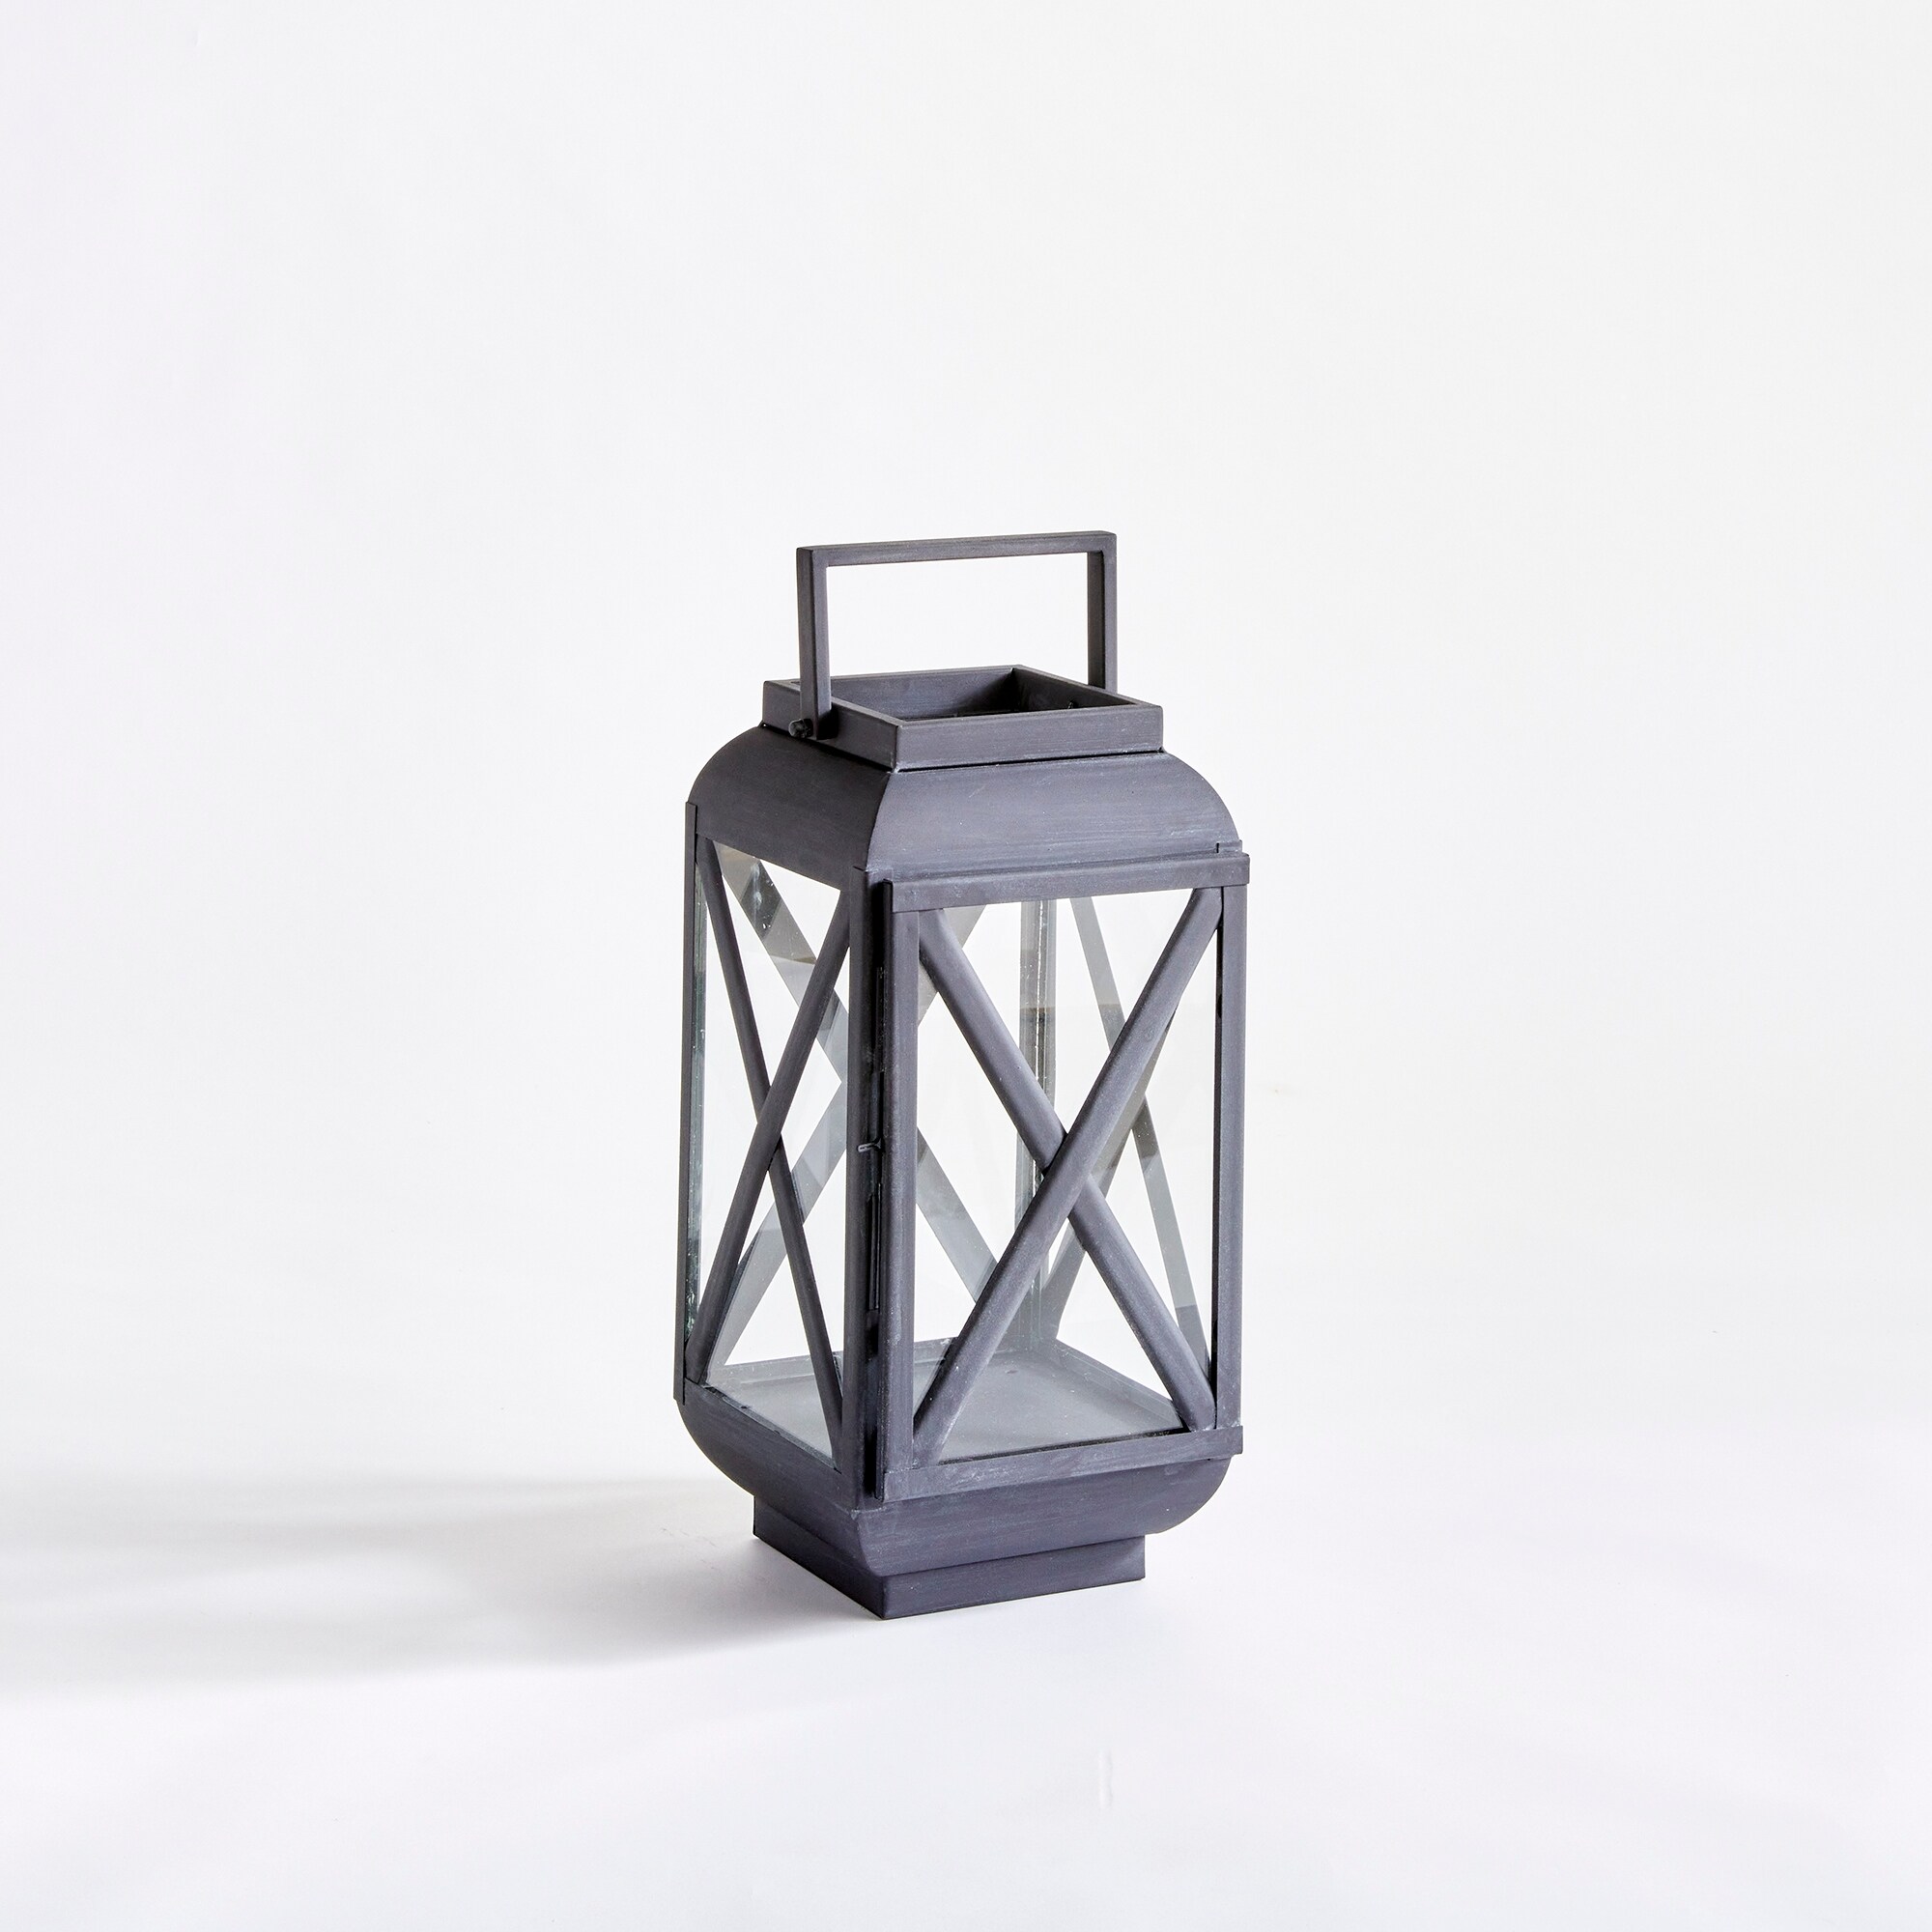 https://ak1.ostkcdn.com/images/products/is/images/direct/395477e6b20cb358be6ae996c492e2bd972af4b5/Terrazza-Outdoor-Lantern-Small.jpg